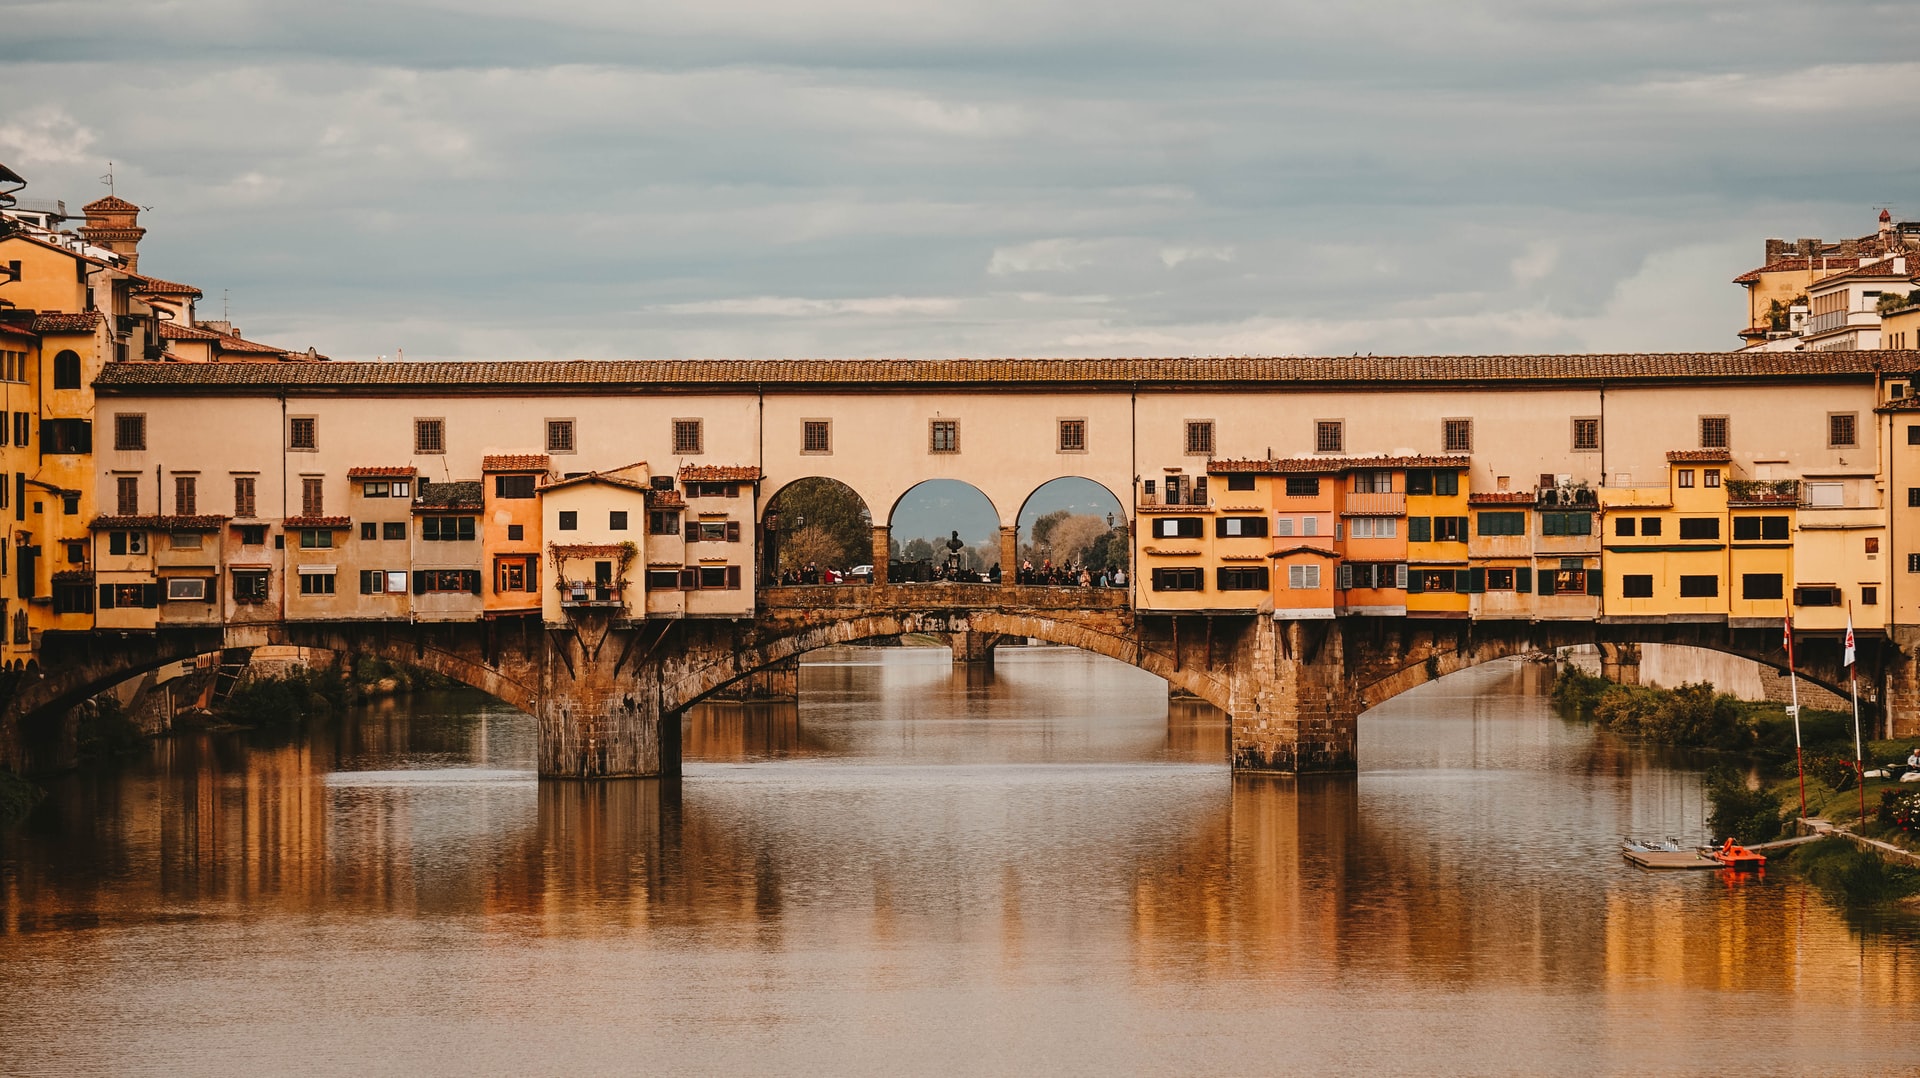 <p>The Renaissance & Medici Tale will tell you how Florence became the Birthplace of the Renaissance thanks to the Medici family. You will visit the Cathedral, the Uffizi Gallery, and la Piazza della Signoria, among other monuments.</p> <p>Image: Unsplash - Ali Nuredini</p>